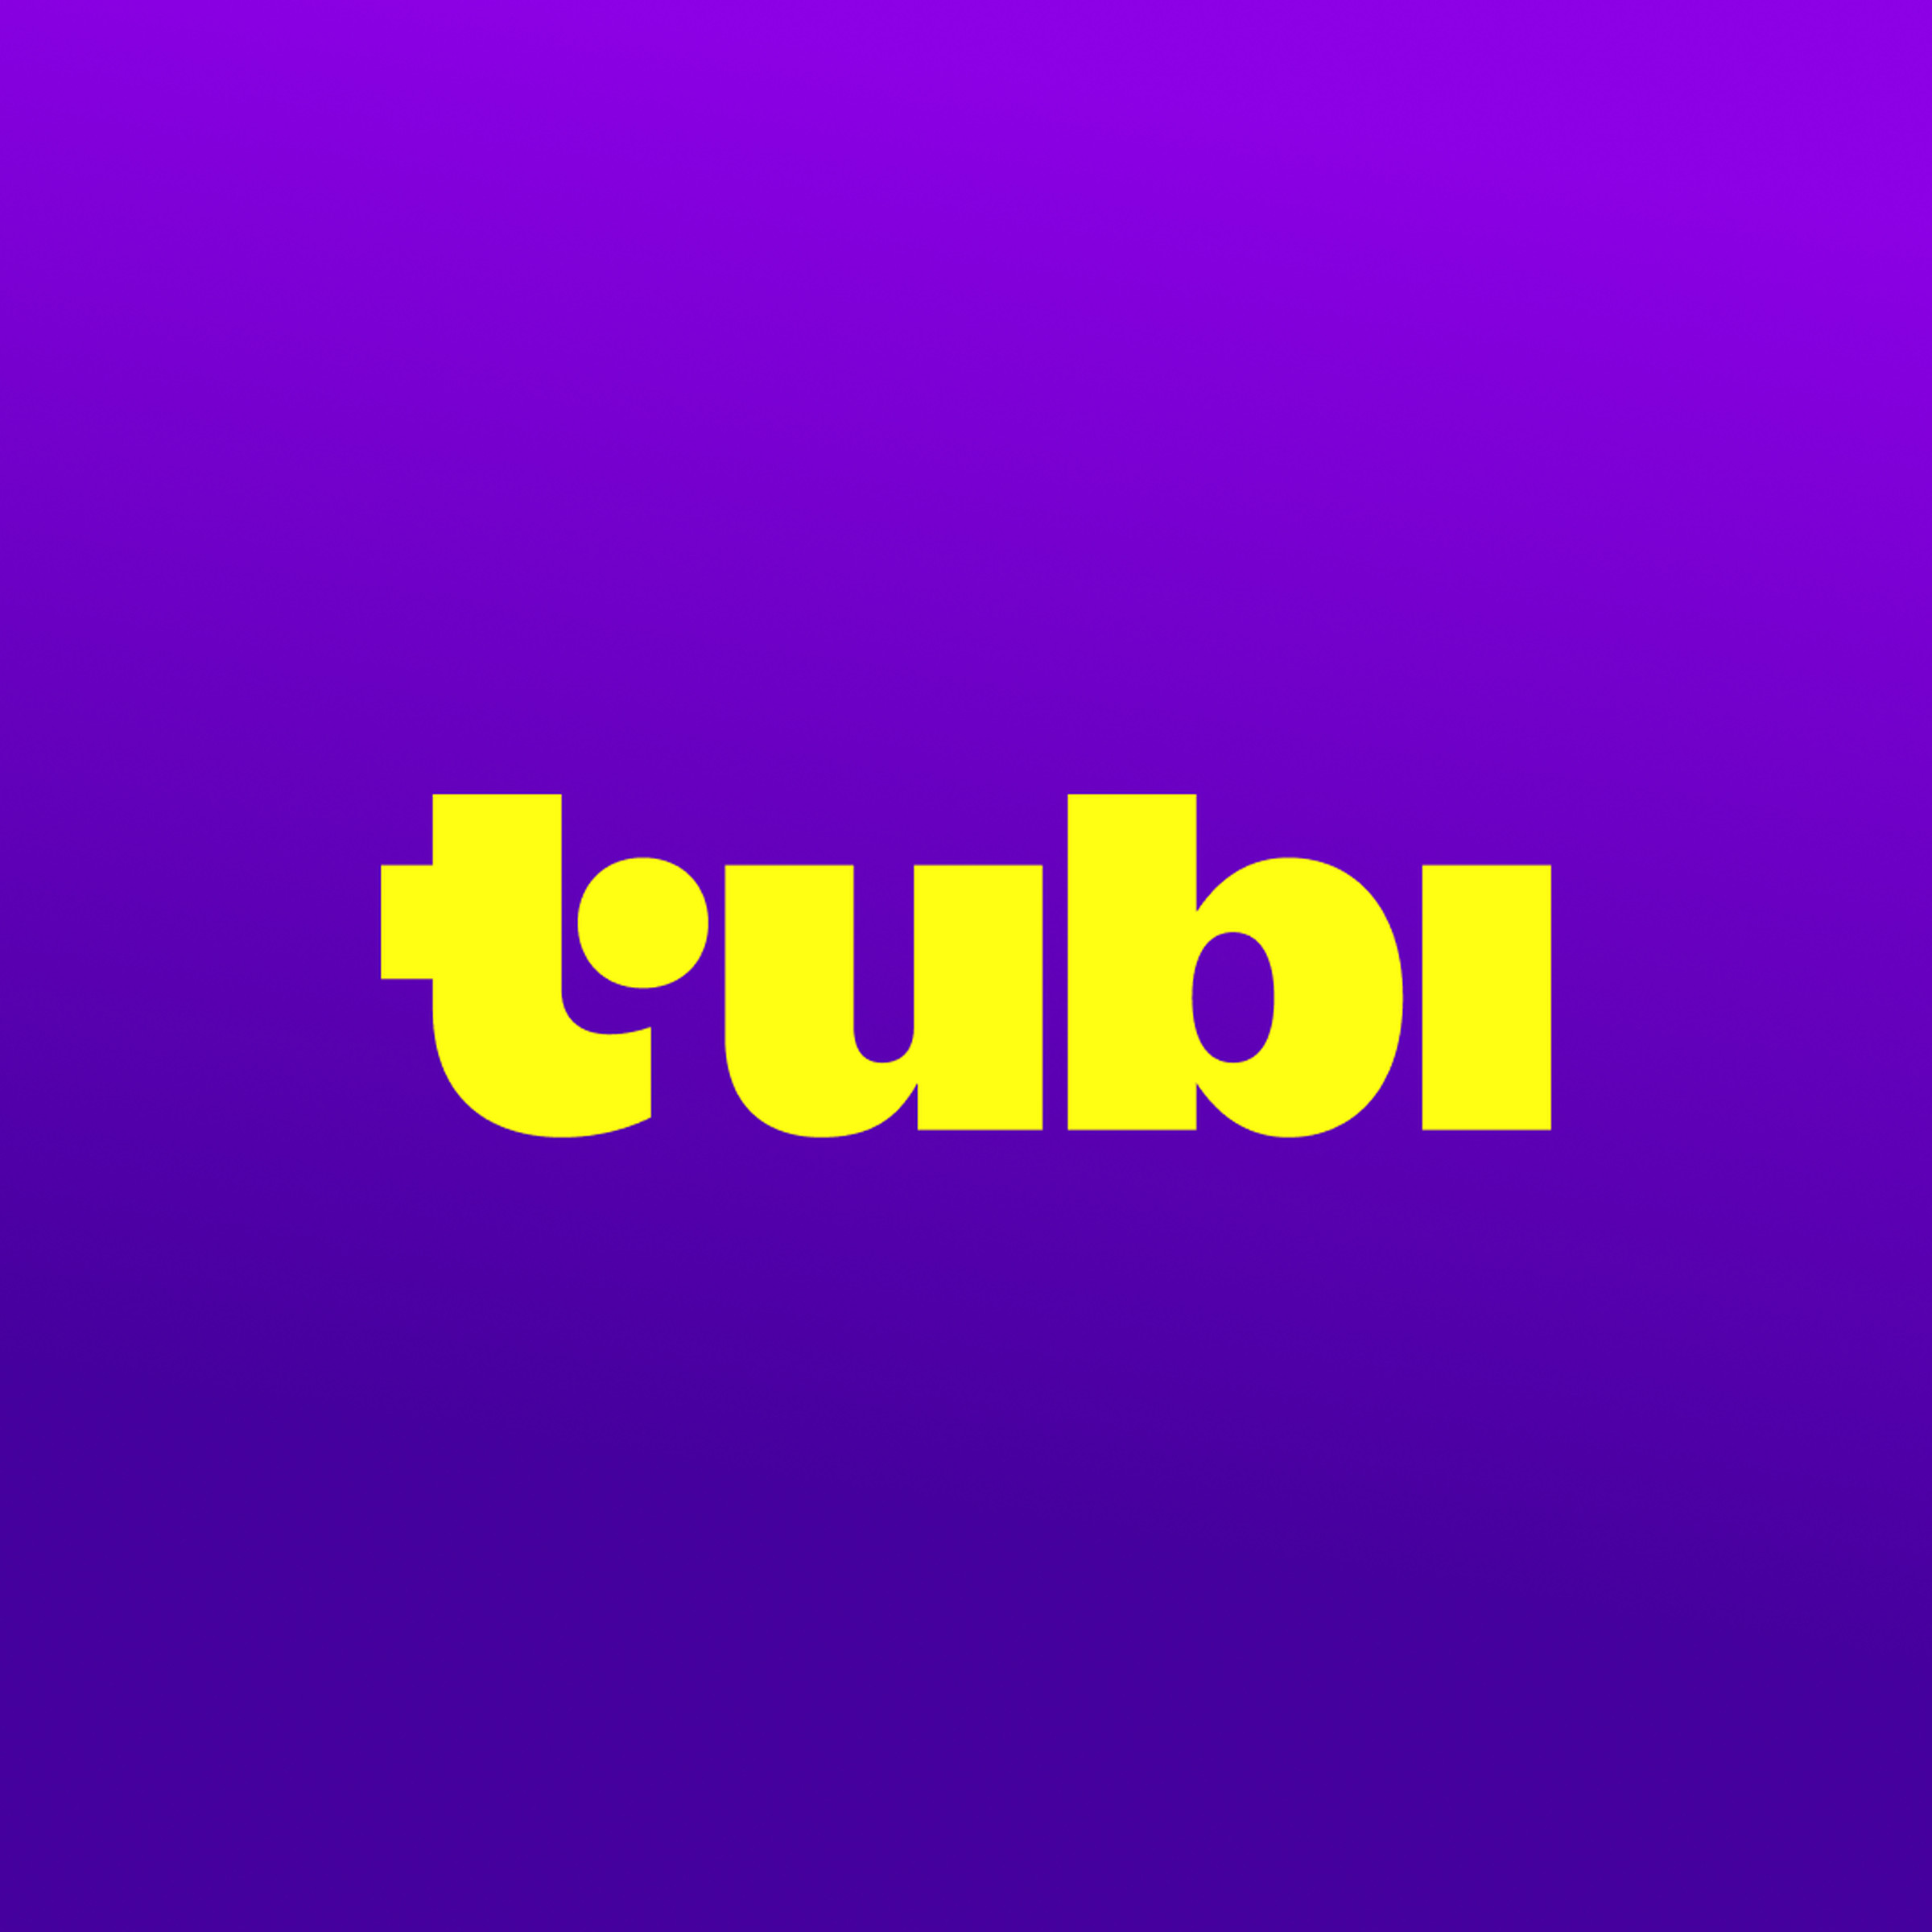 The name “Tubi” spelled in yellow stylized letters on a purple background.